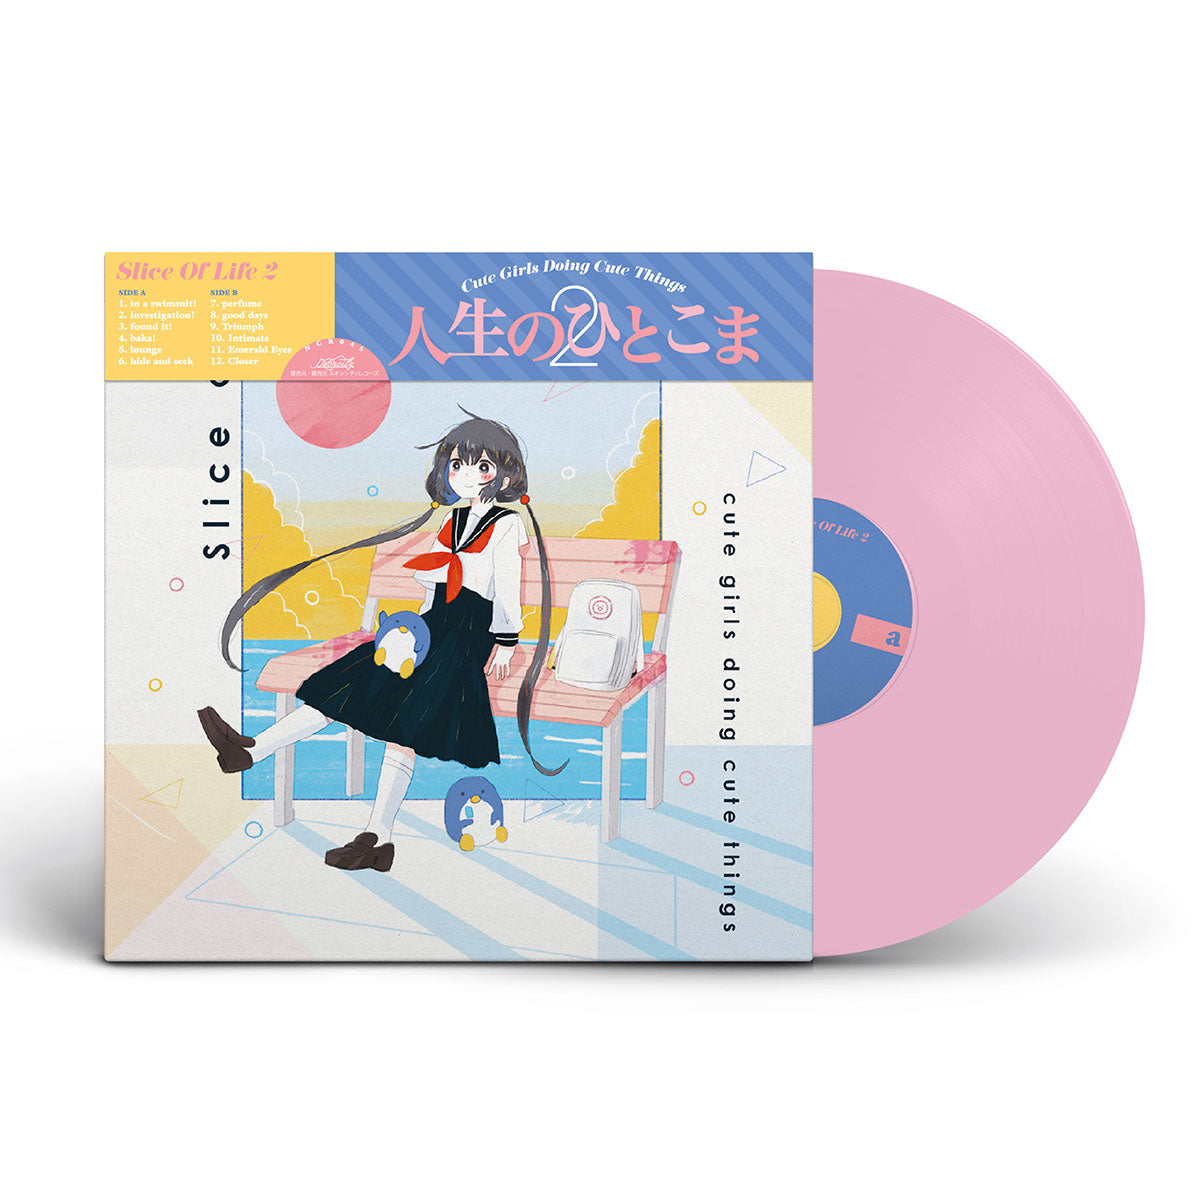 cute girl doing cute things  - 'Slice of Life 2' Limited Edition 12" Vinyl - Neoncity Records